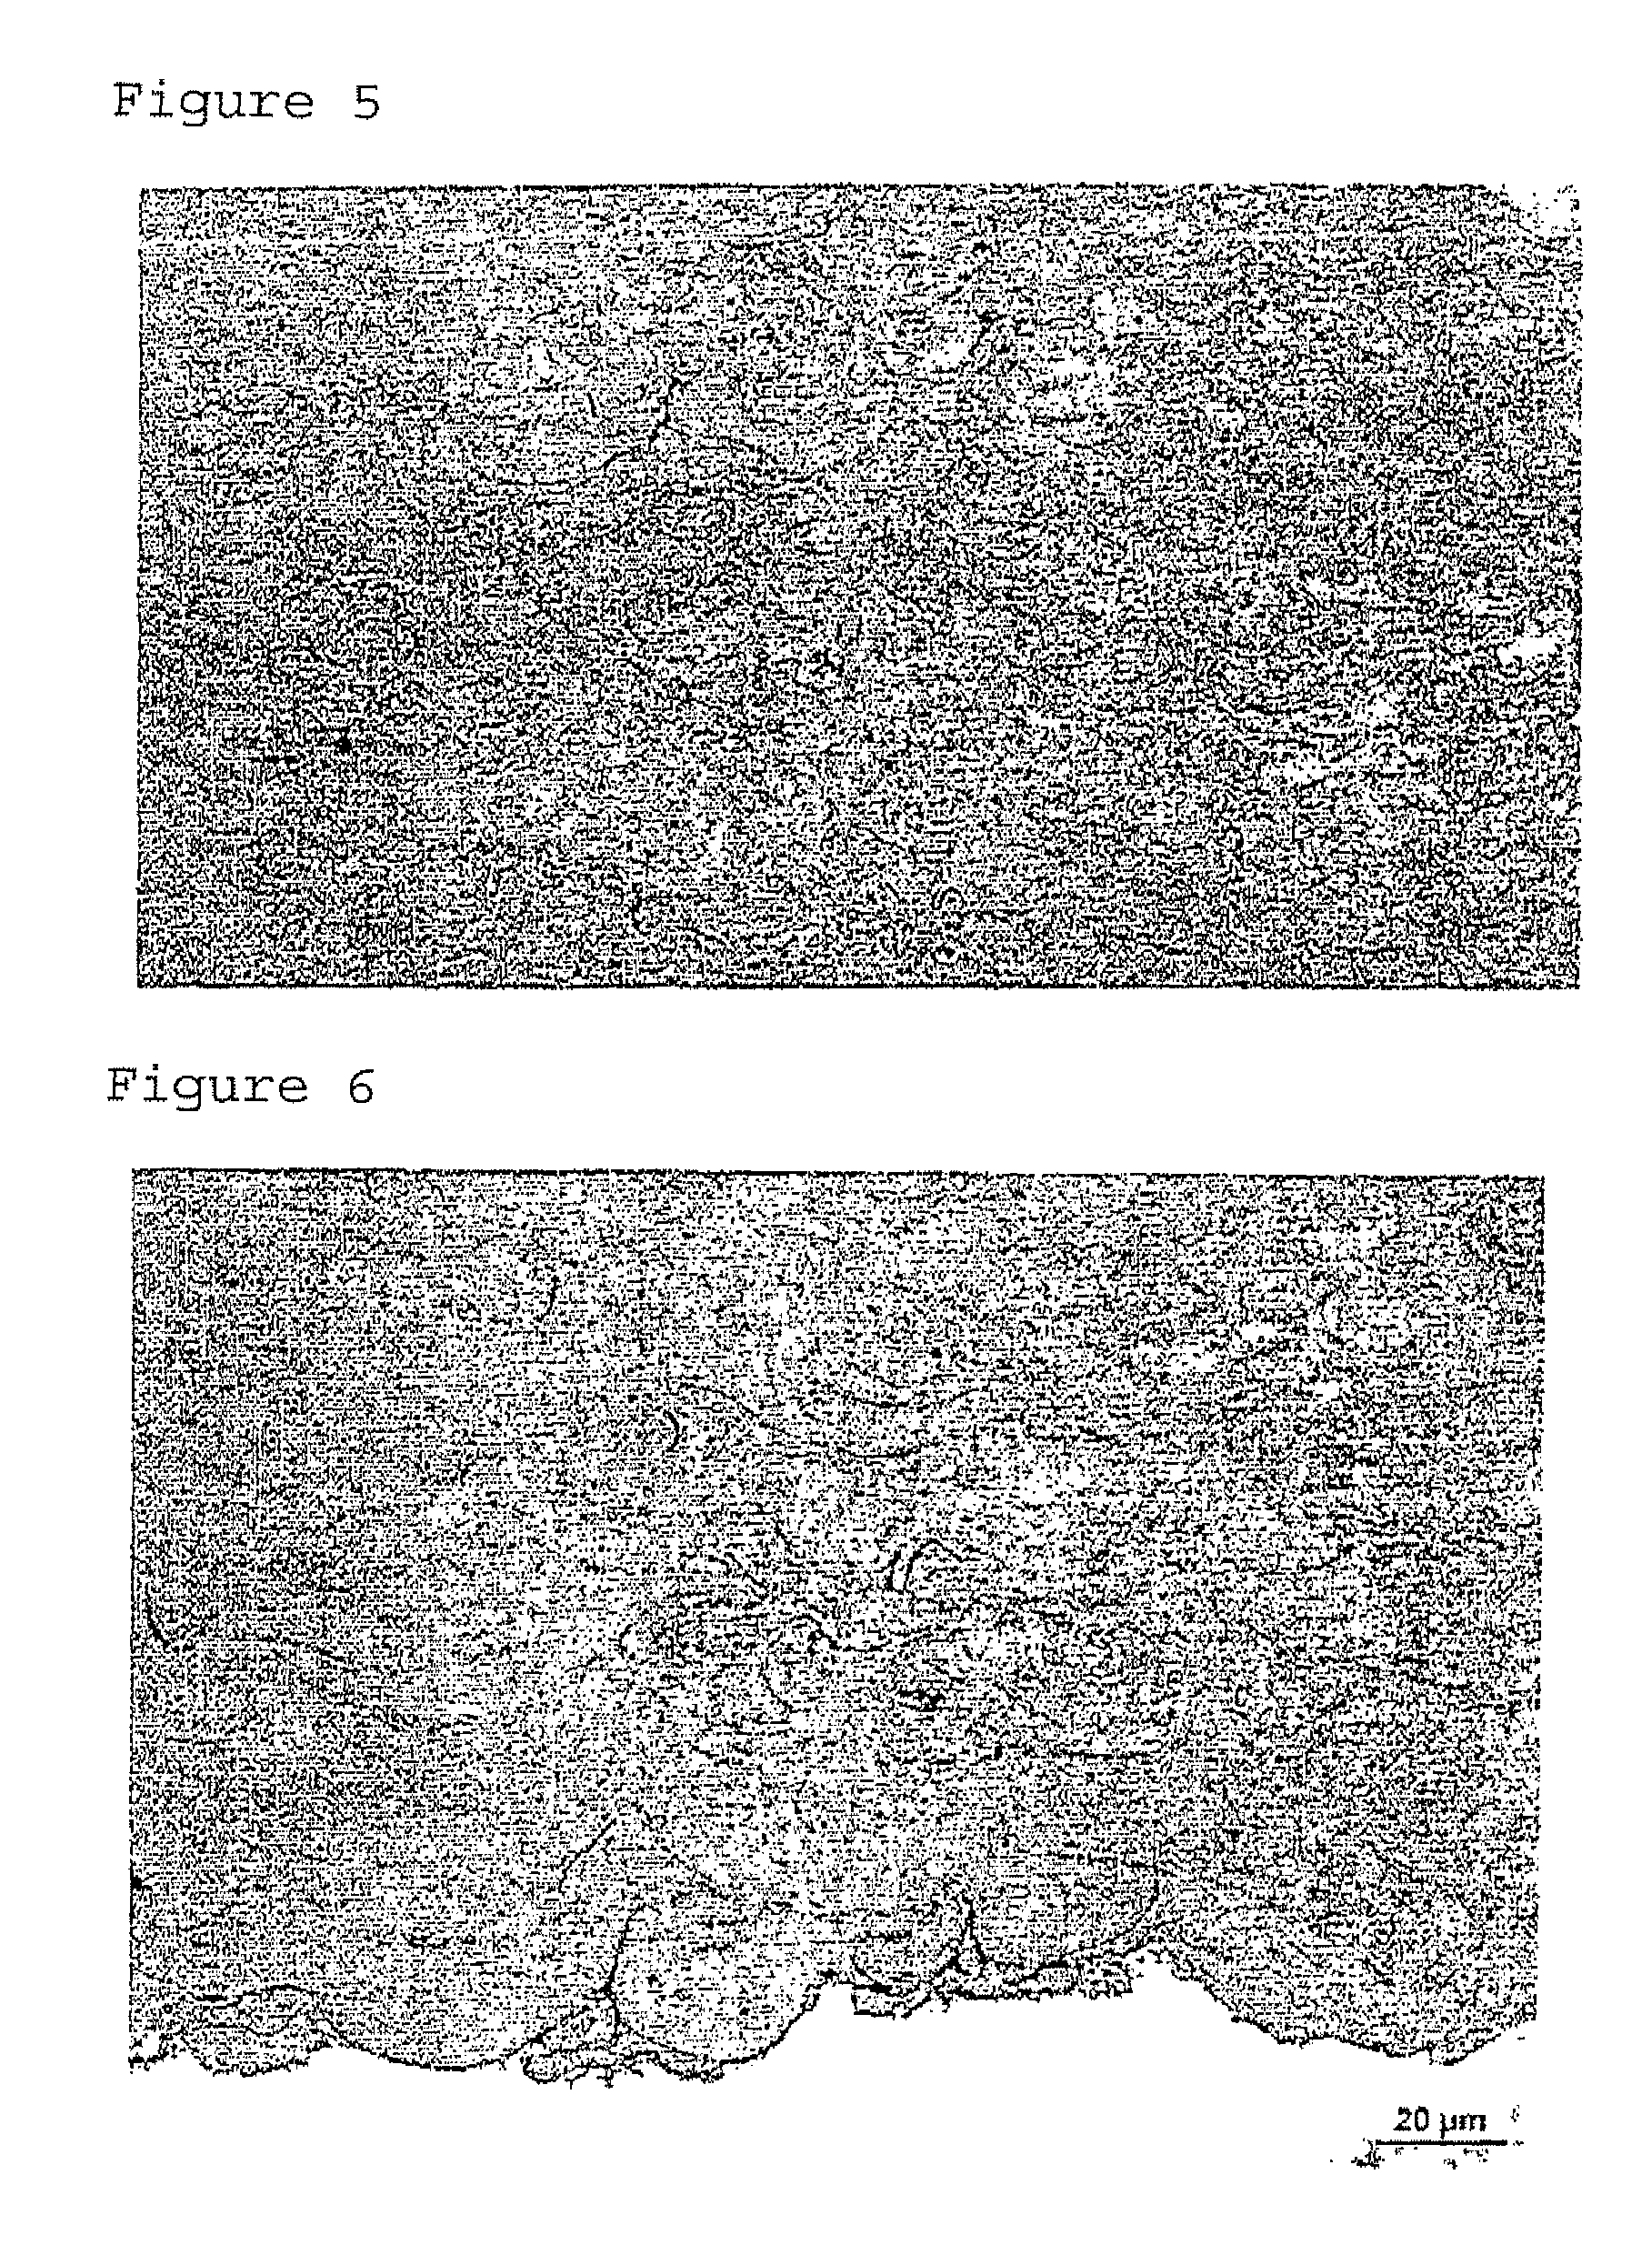 Low-energy method for fabrication of large-area sputtering targets